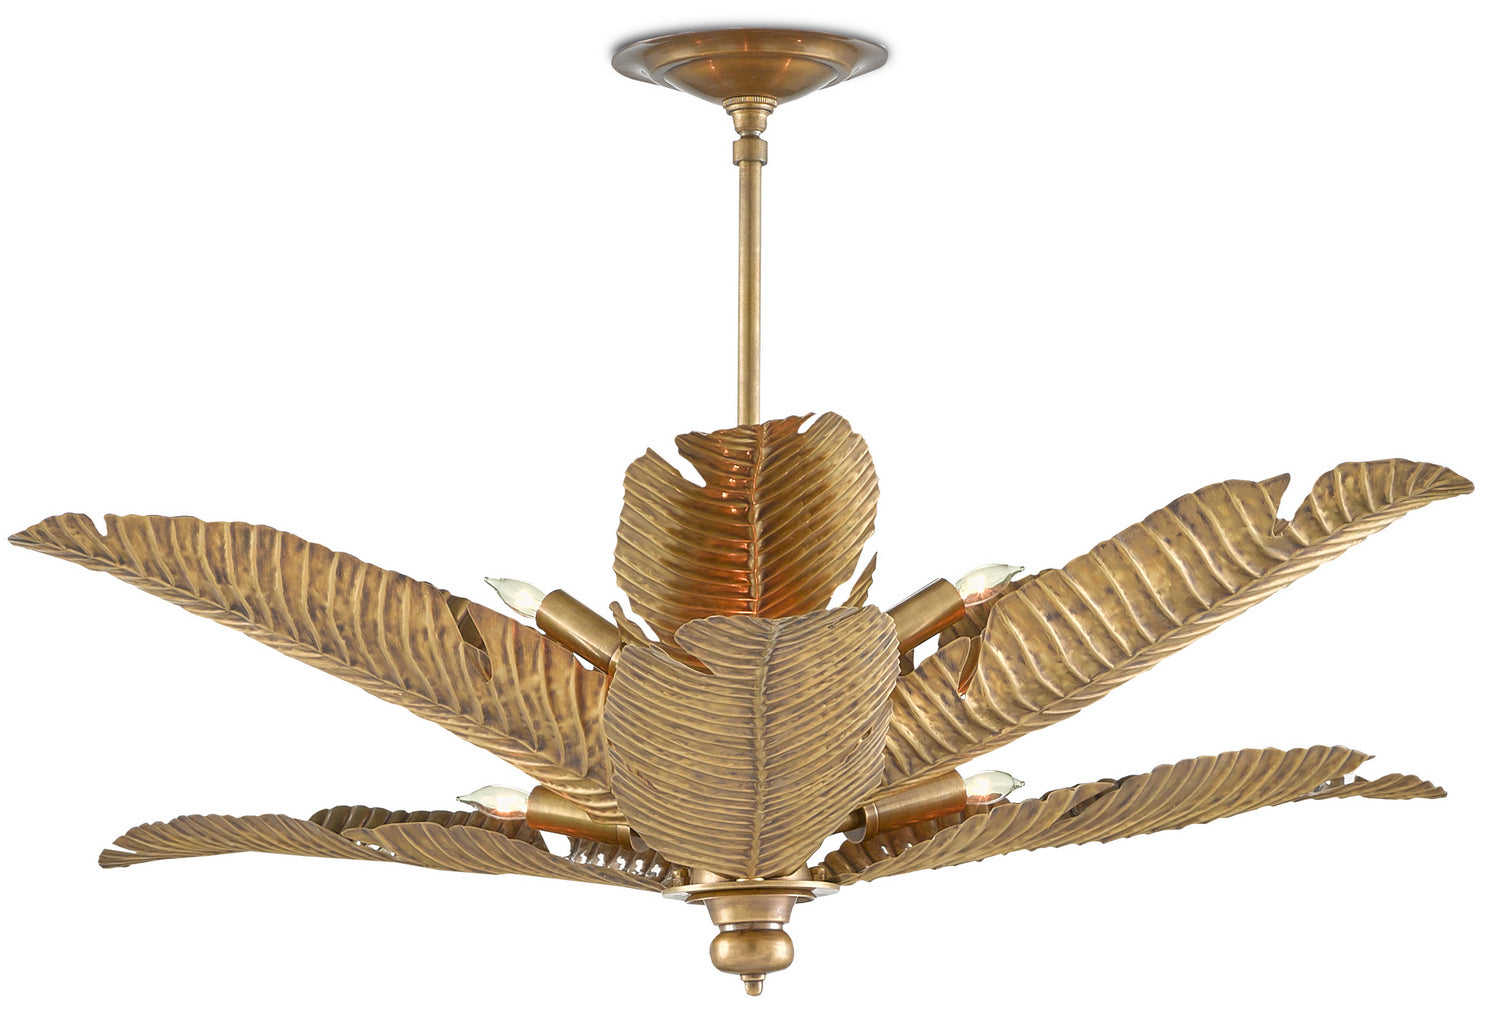 Six Light Semi-Flush Mount from the Tropical collection in Vintage Brass finish